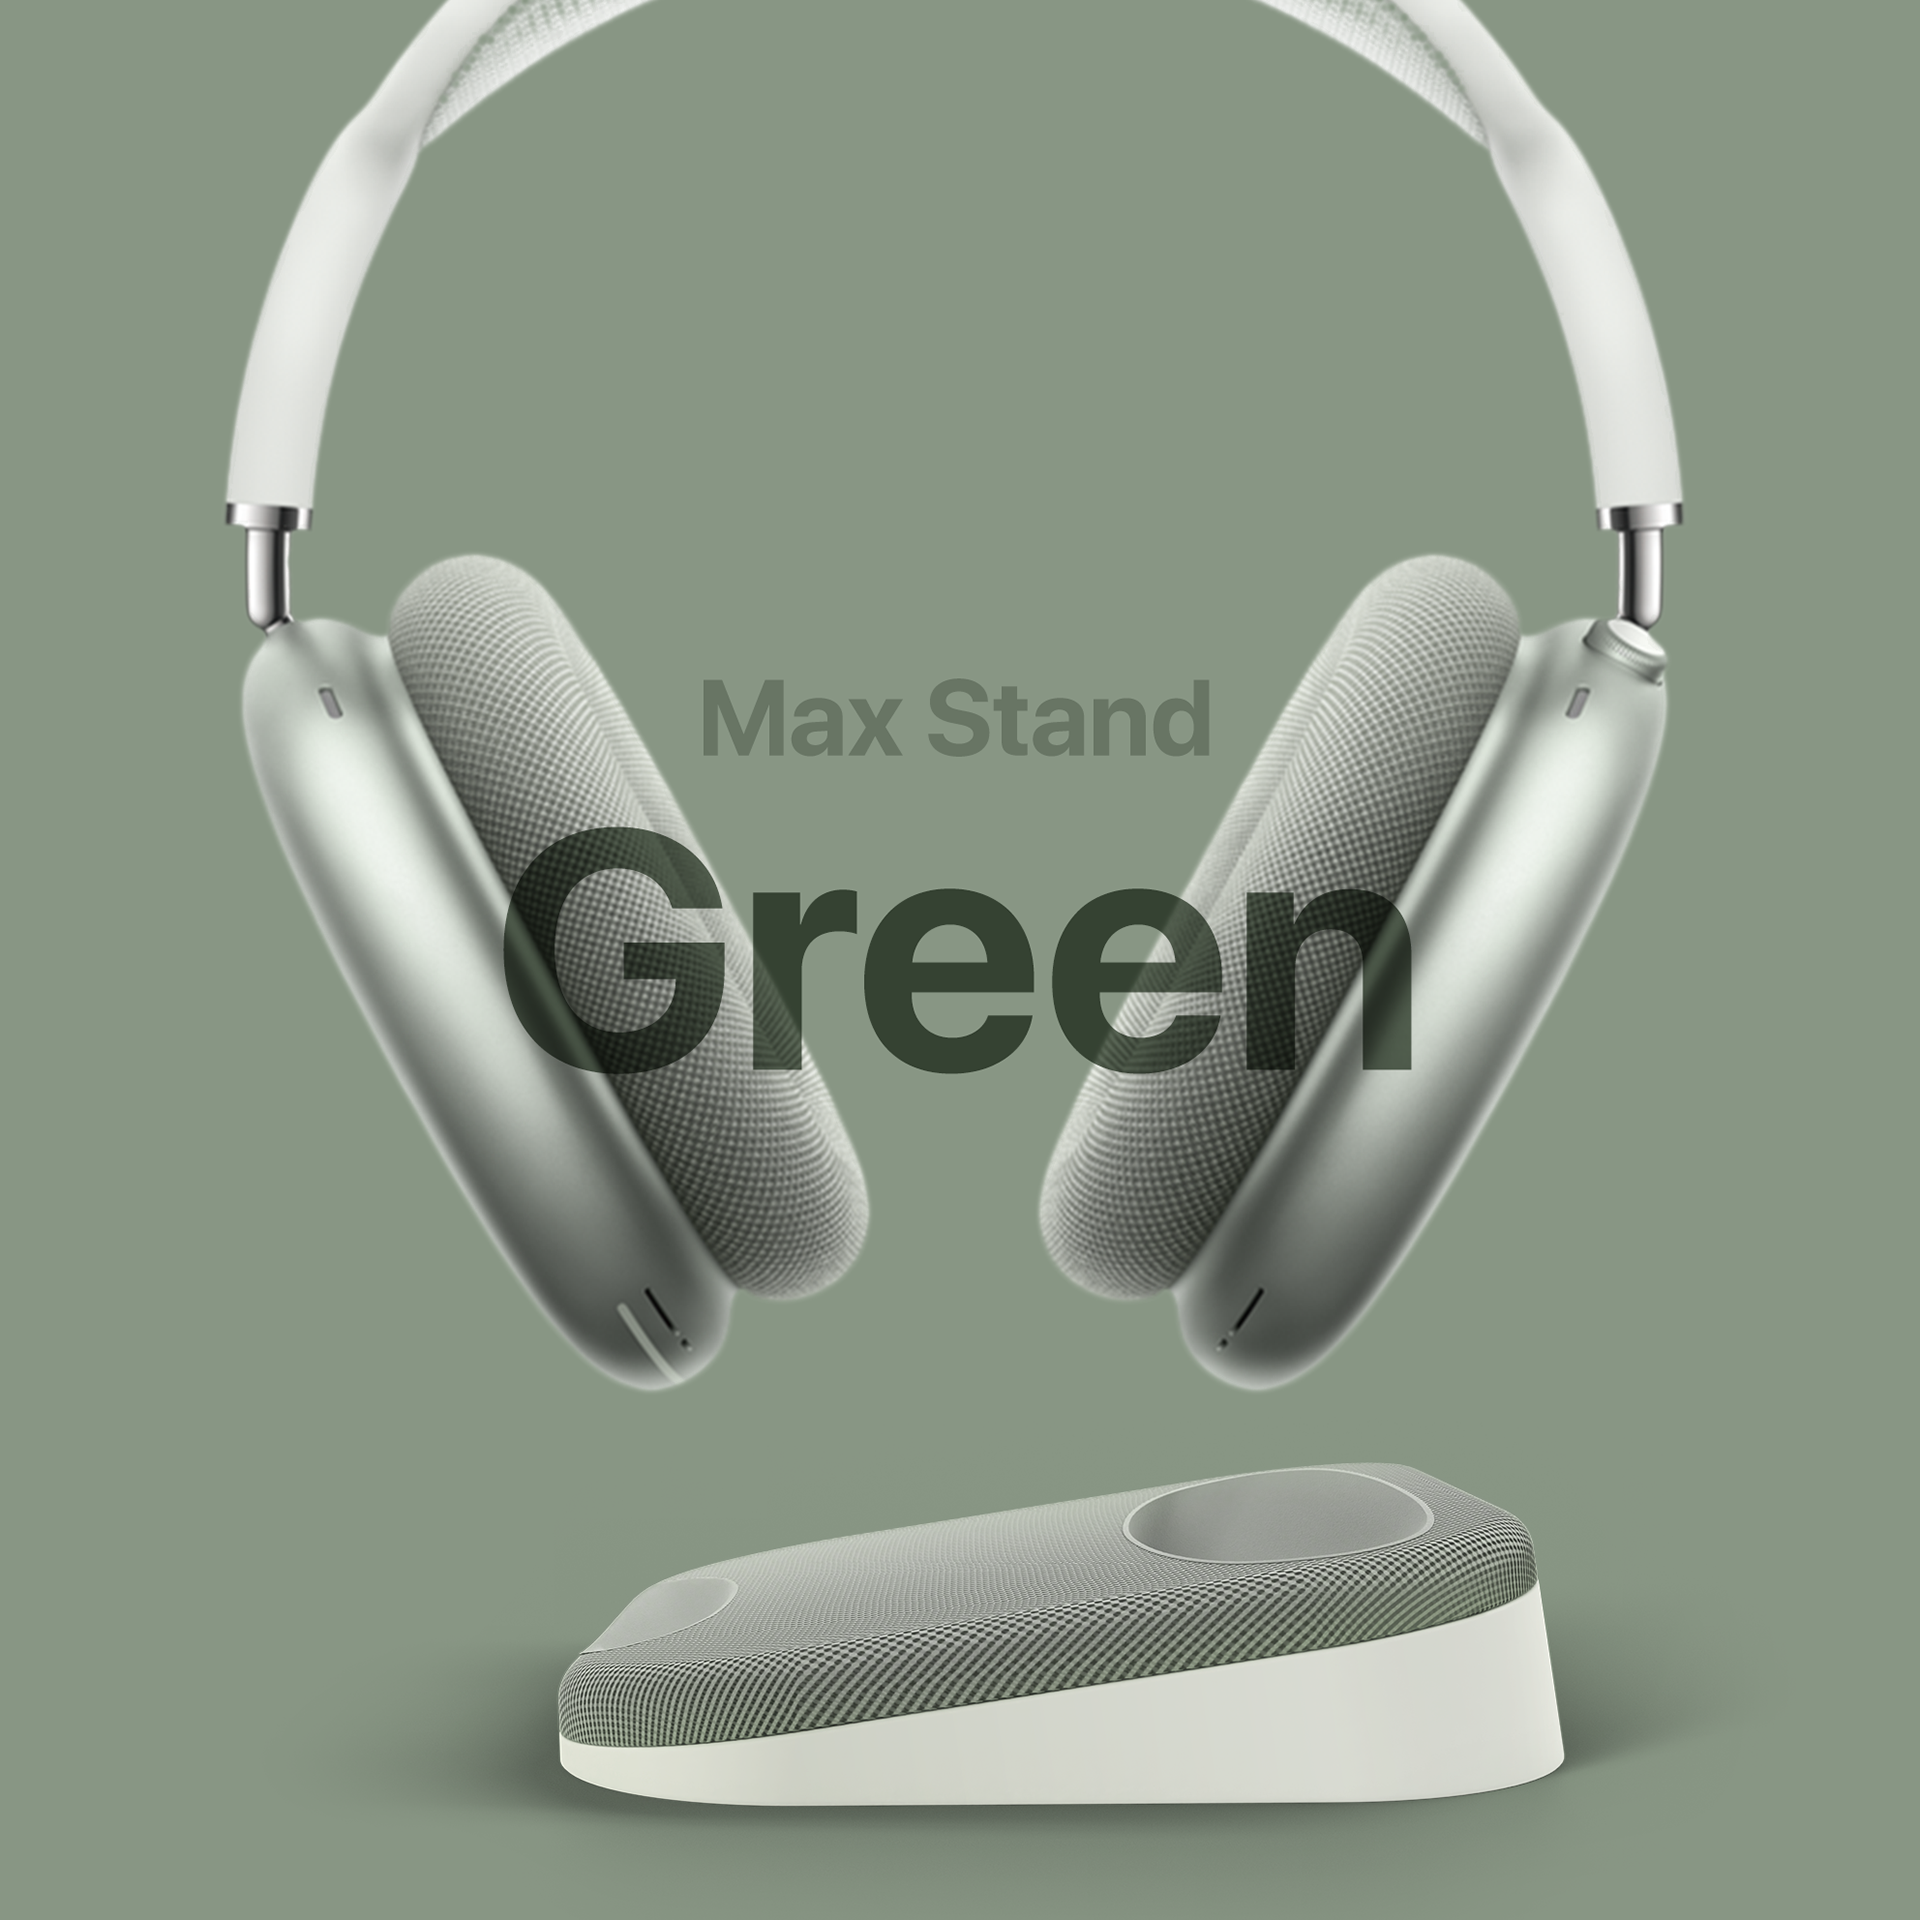 The Max Stand